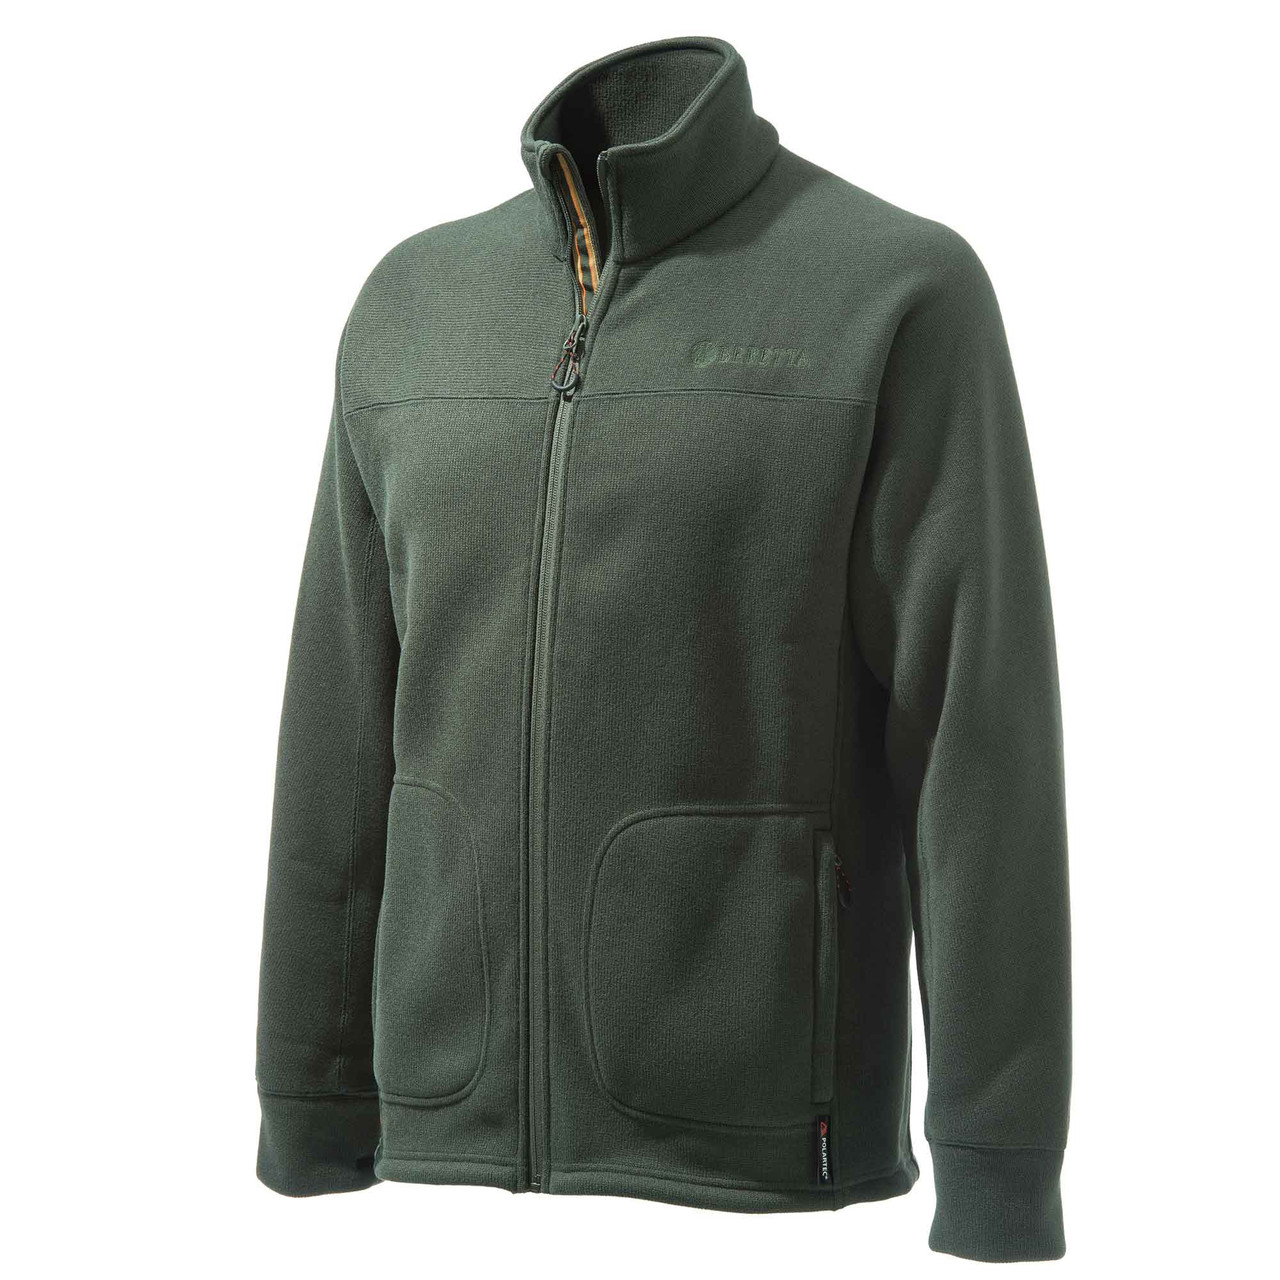 Polartec Thermal Pro Sweater49132 - Gordy & Sons Outfitters